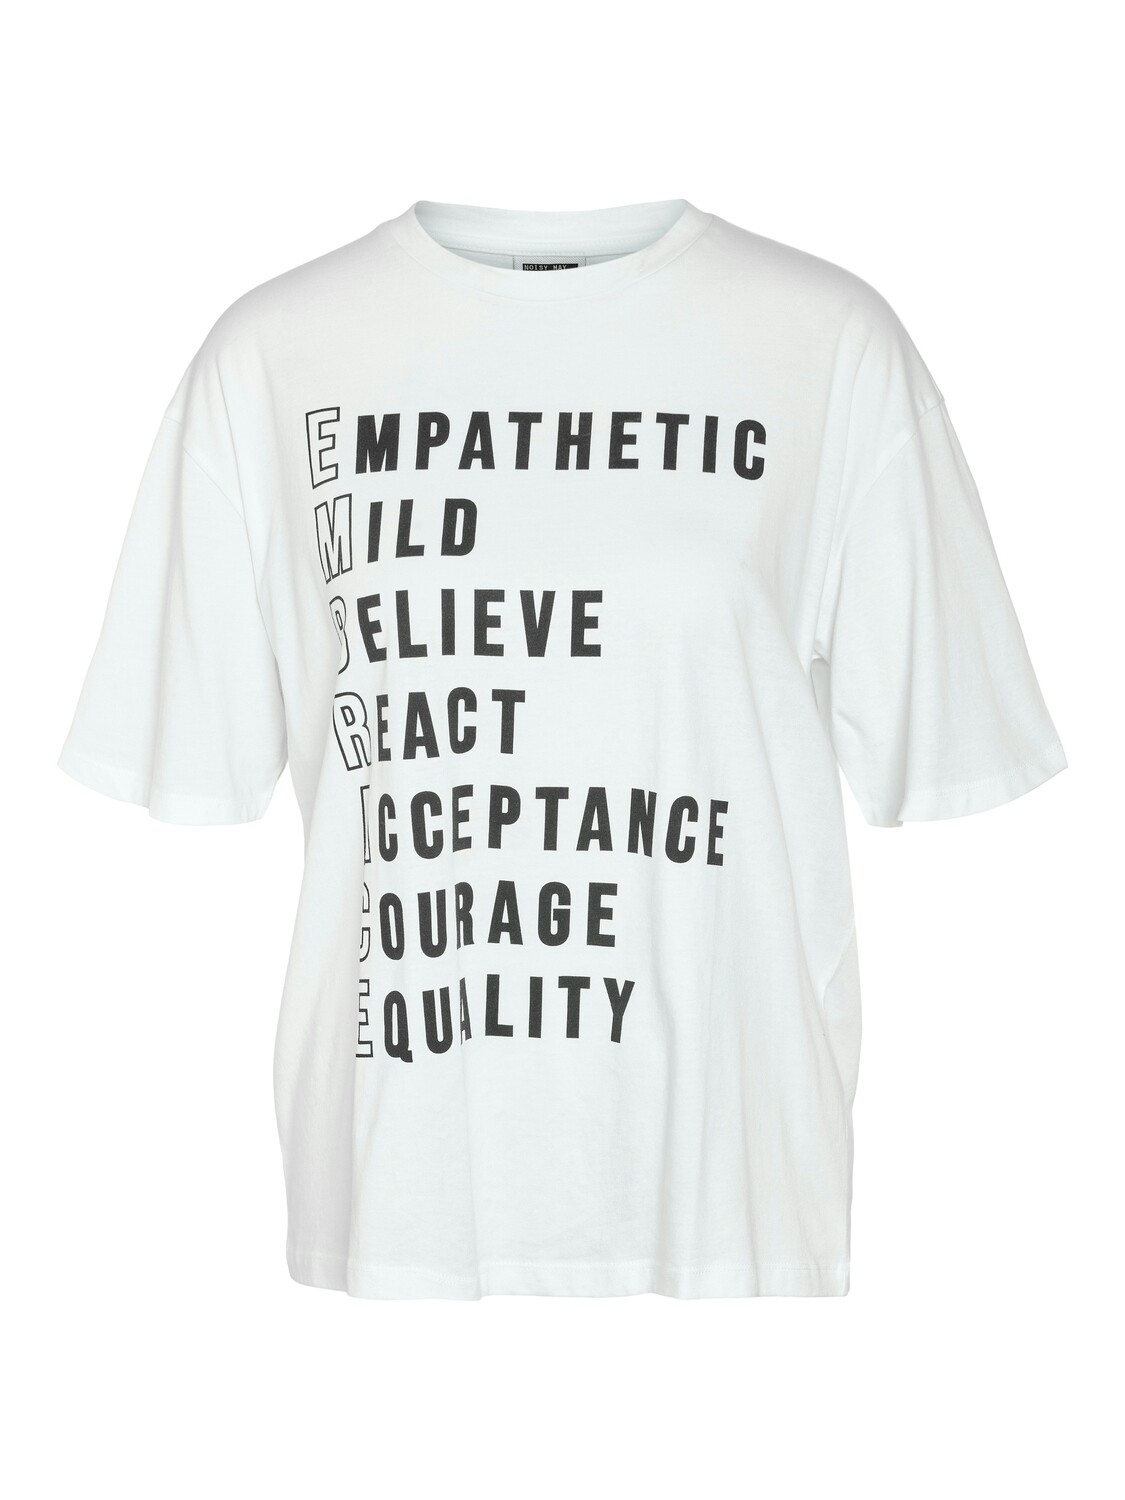 NMMILLIE S/S T-SHIRT JRS FWD Bright White-EMBRACE